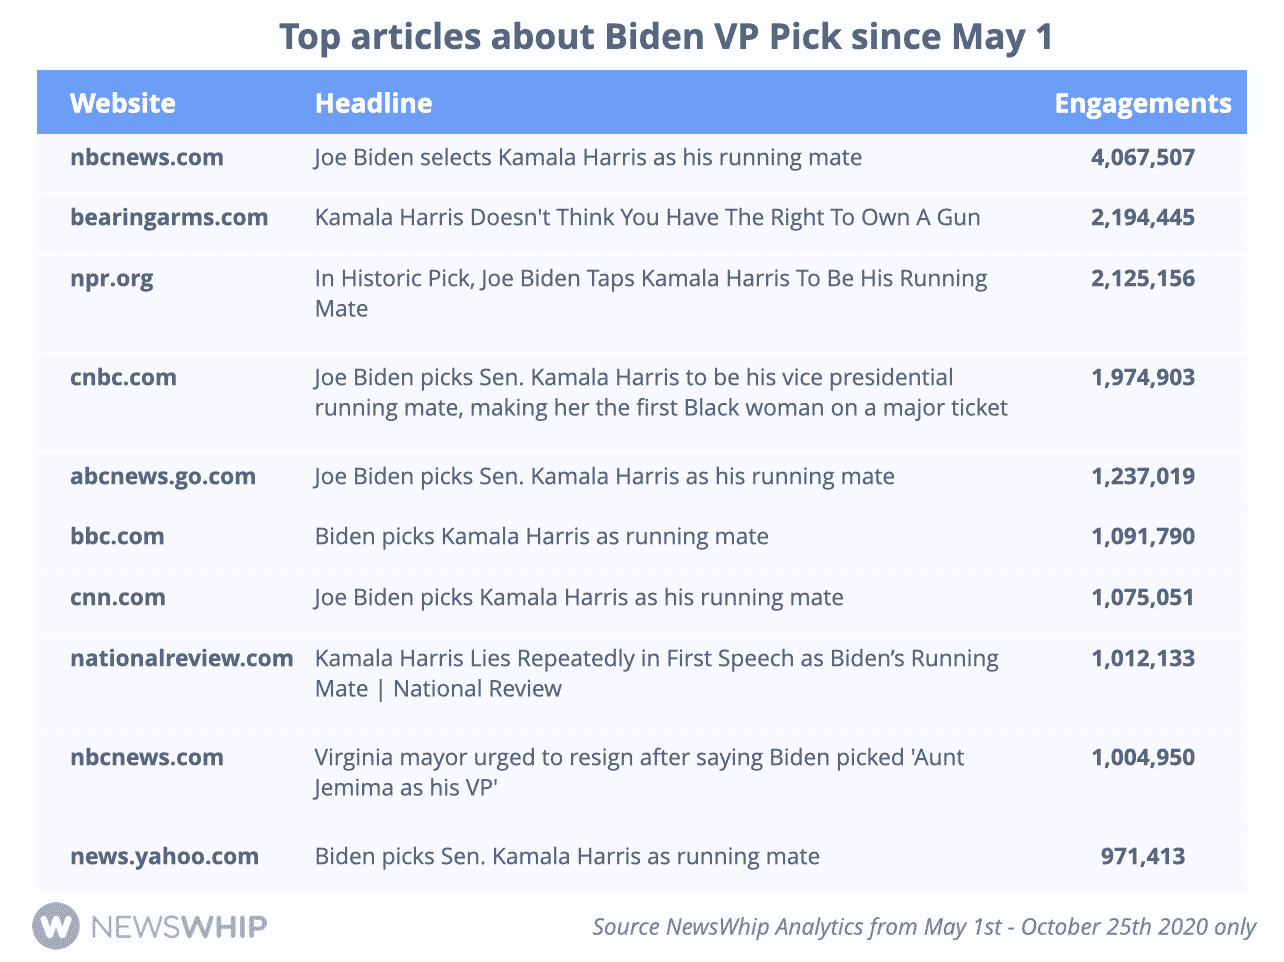 Chart showing the most engaged stories about Joe Biden's VP pick in 2020, ranked by engagement